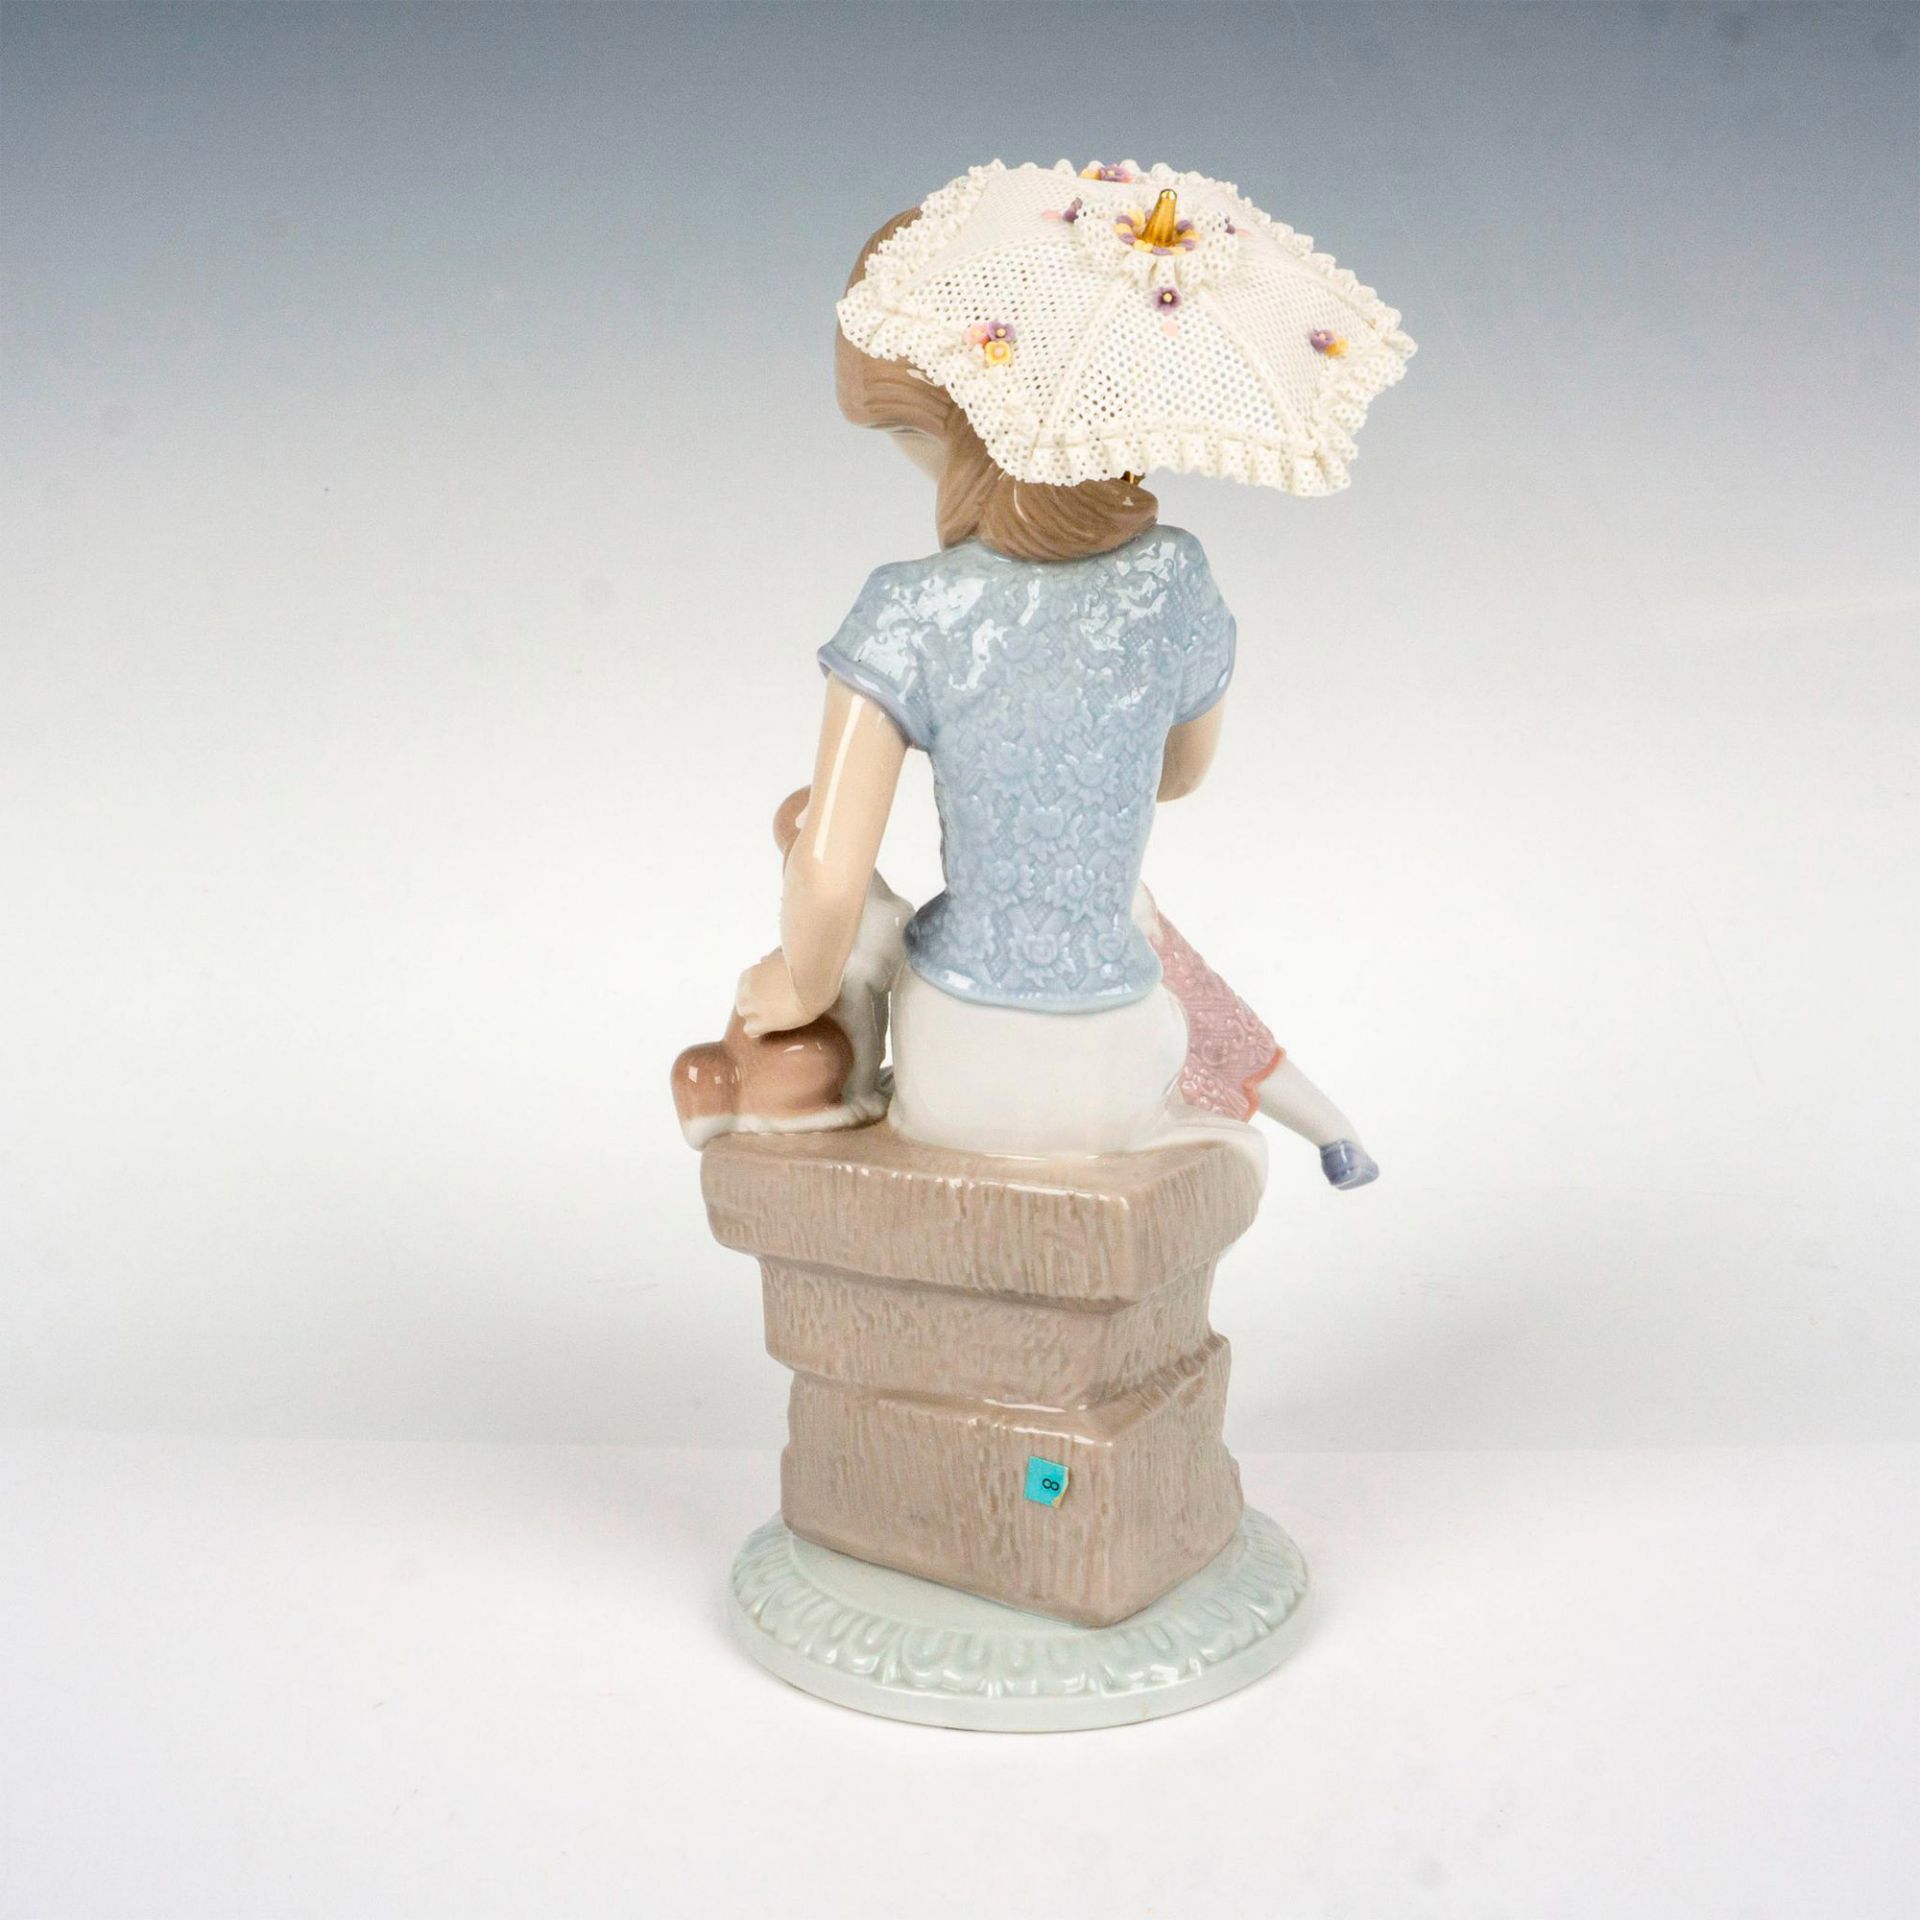 Picture Perfect 1007612 - Lladro Figurine - Image 2 of 4